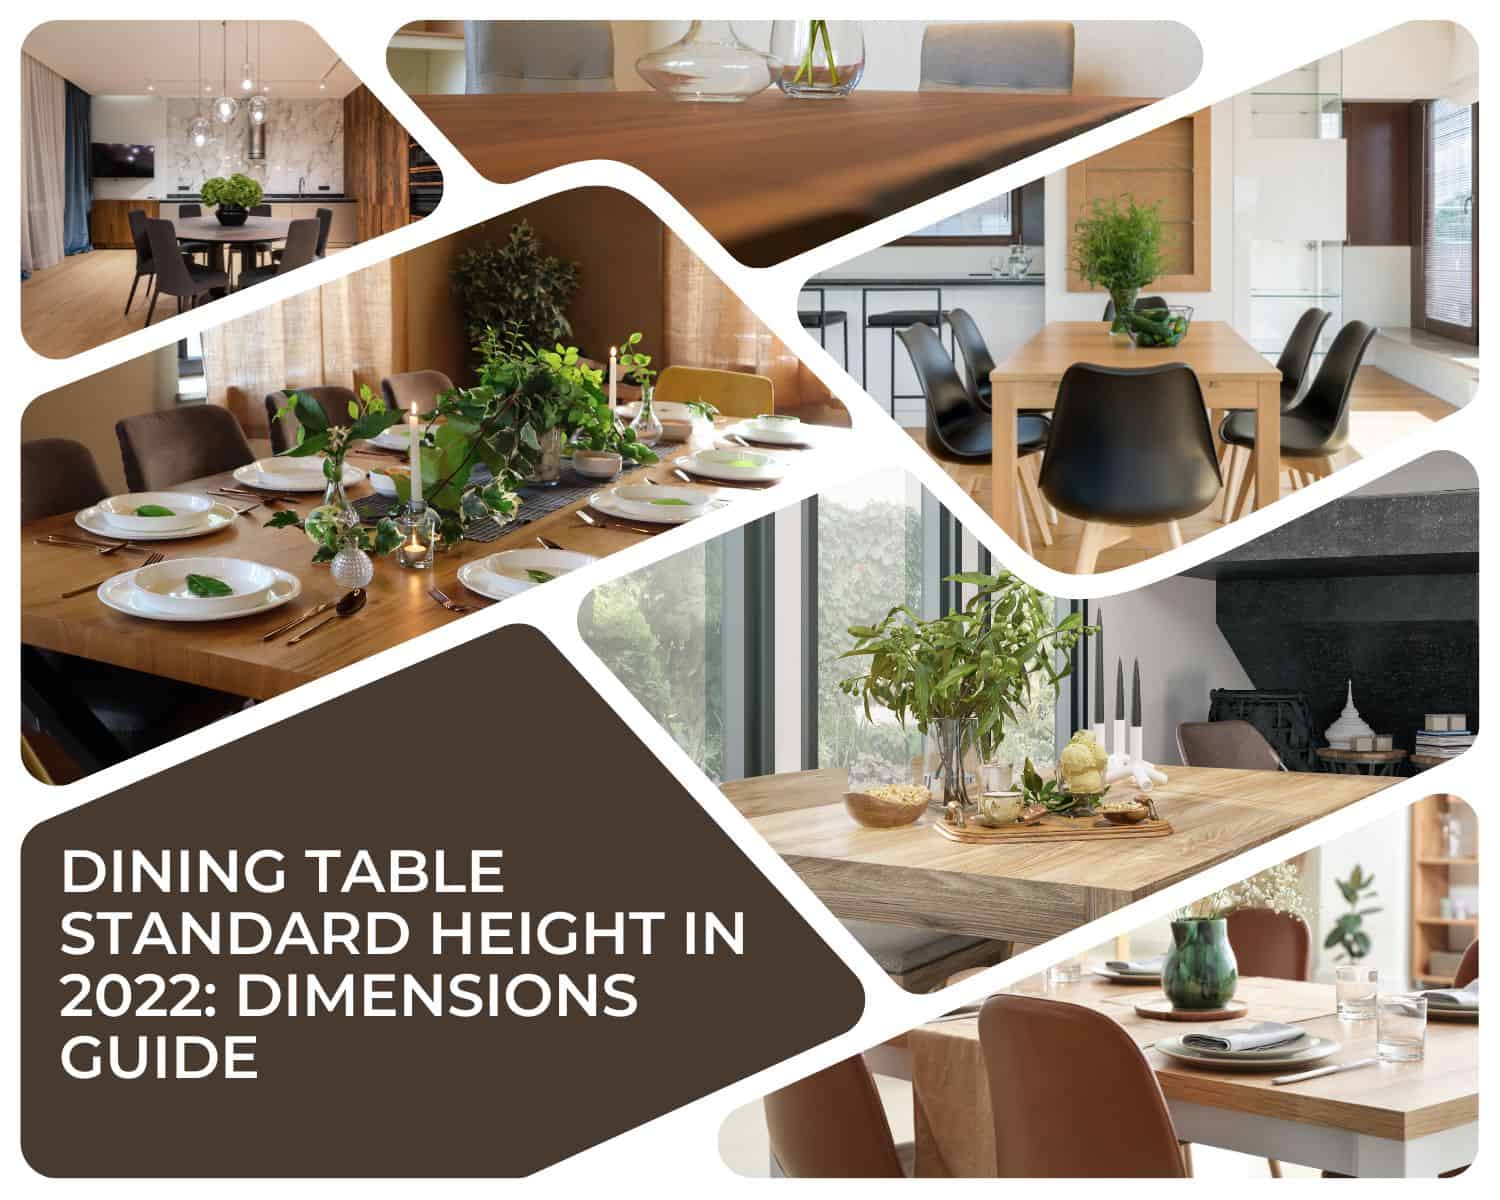 Dining Table Standard Height in 2022 Dimensions Guide